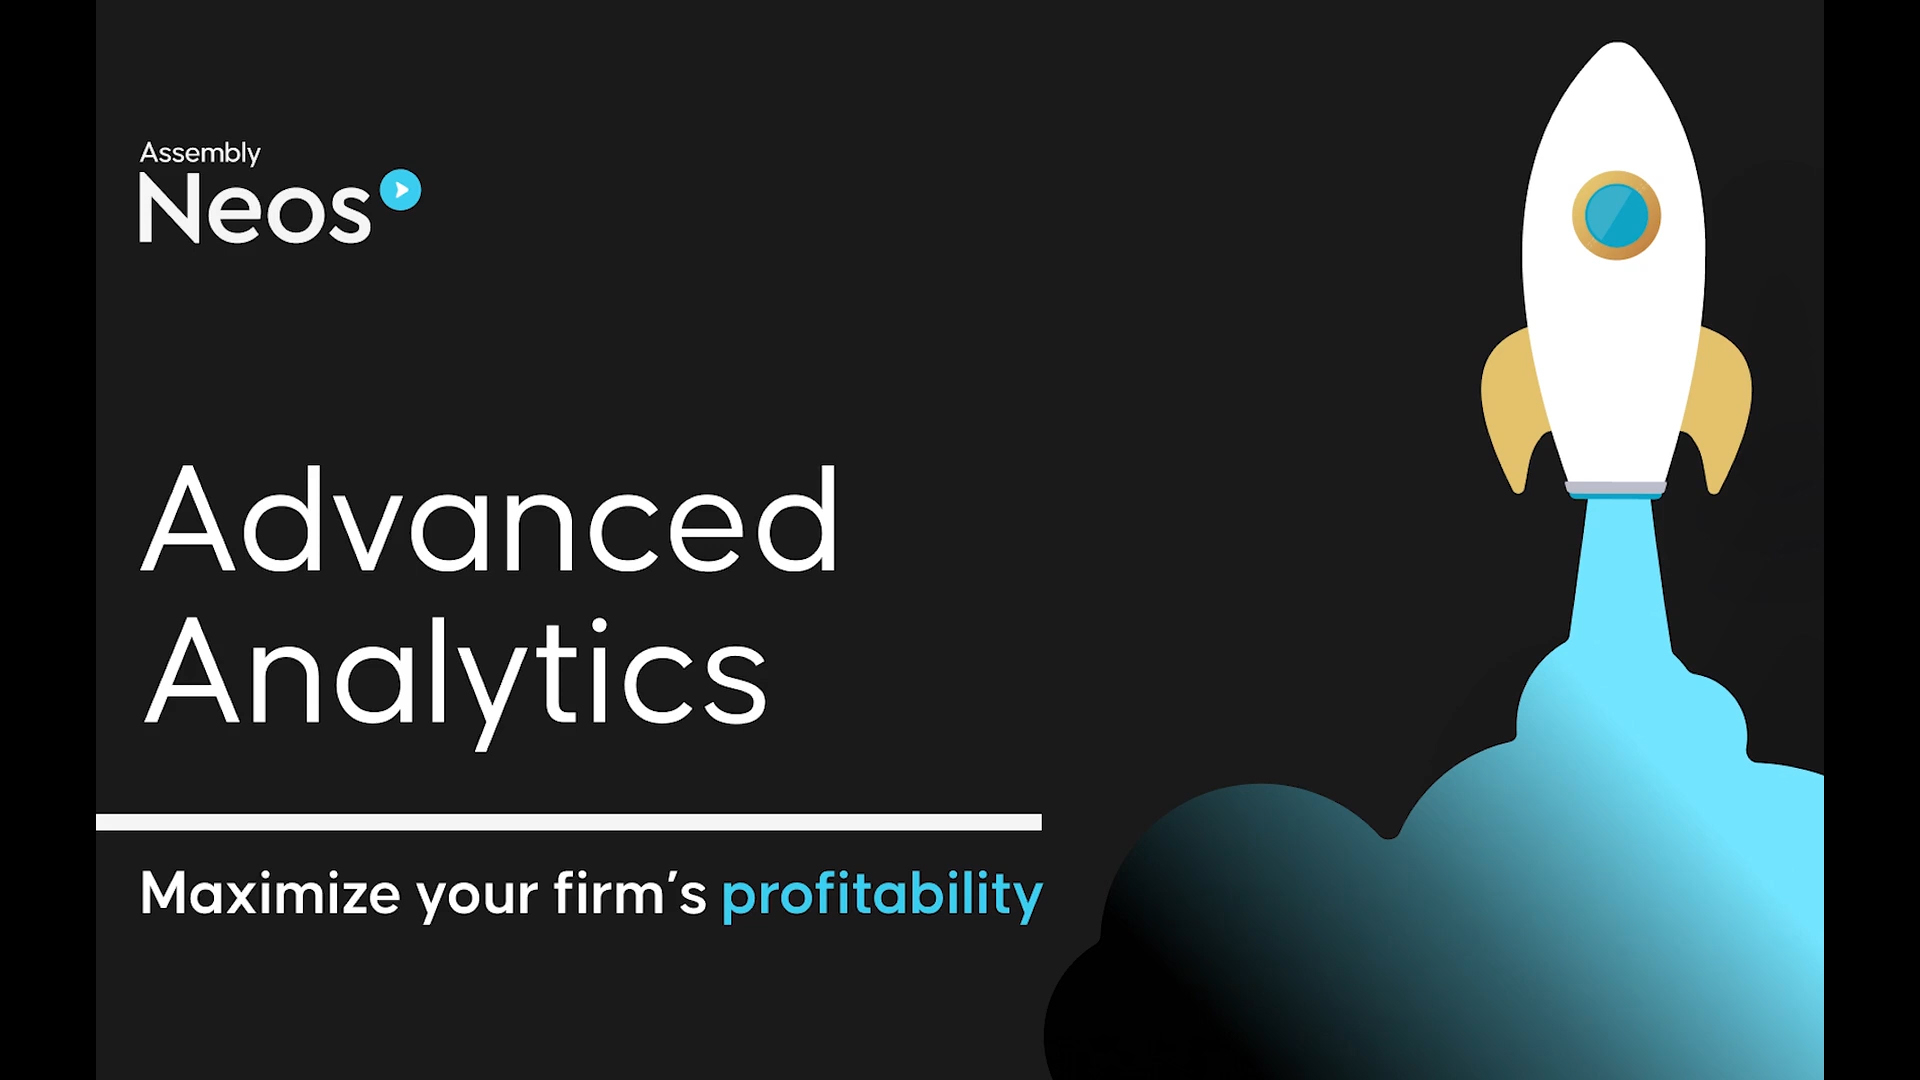 See how the all-new Advanced Analytics Neos product will give you all the data you need to maximize your firm's profitability!